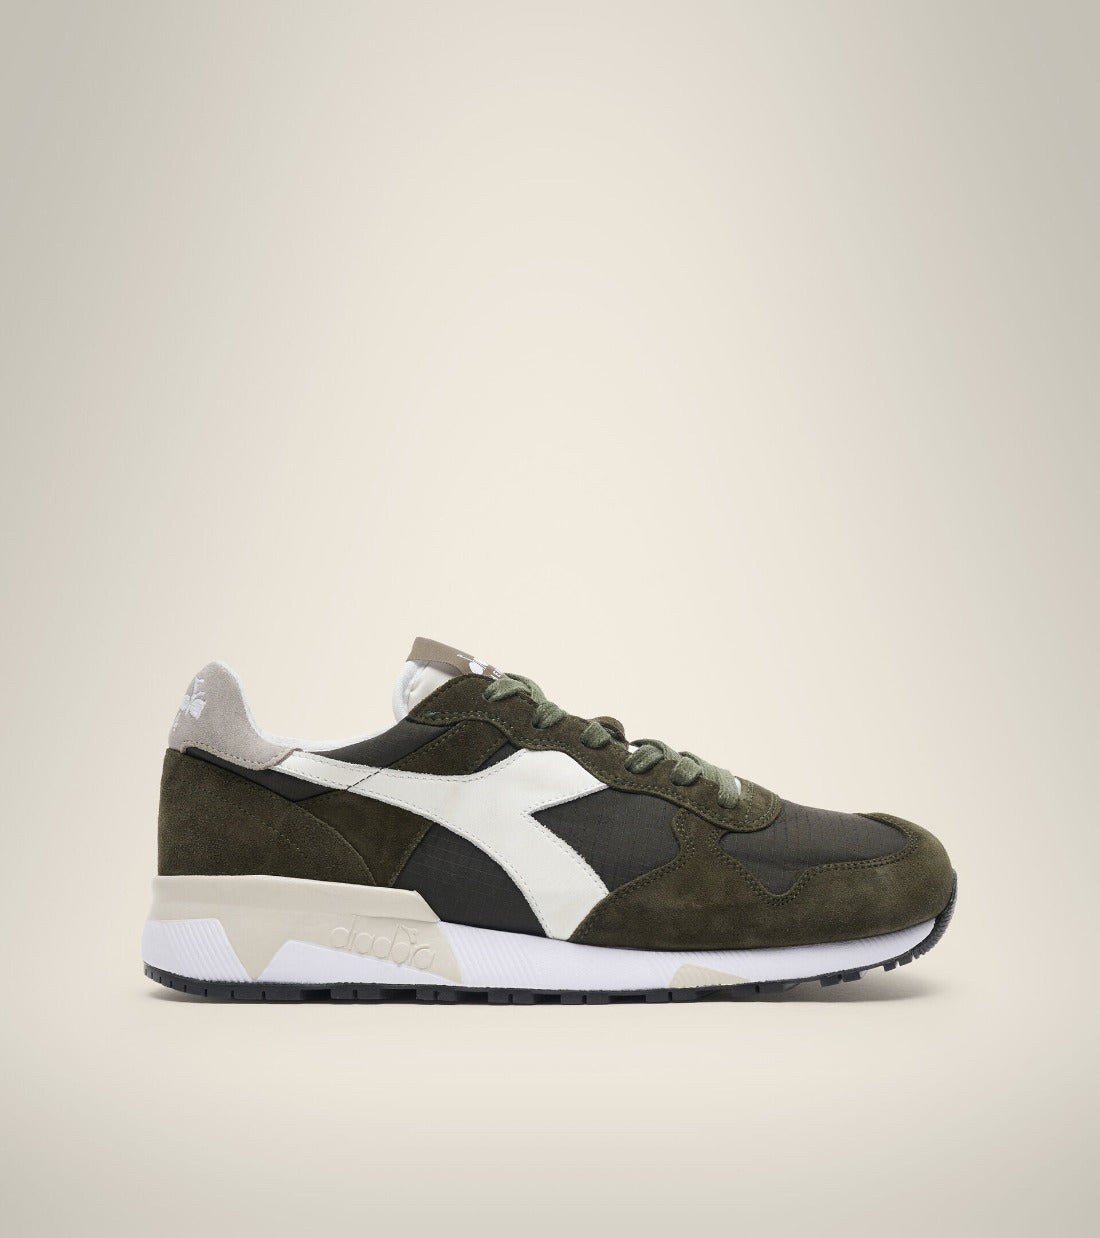 The men's diadora Trident 90 Ripstop comes in premium ripstop textile, suede leather and special stone wash treatment. The ripstop fabric and suede leather, together with the special stonewashed treatment, transform this 'sporty' shoe into one suitable for any occasion.